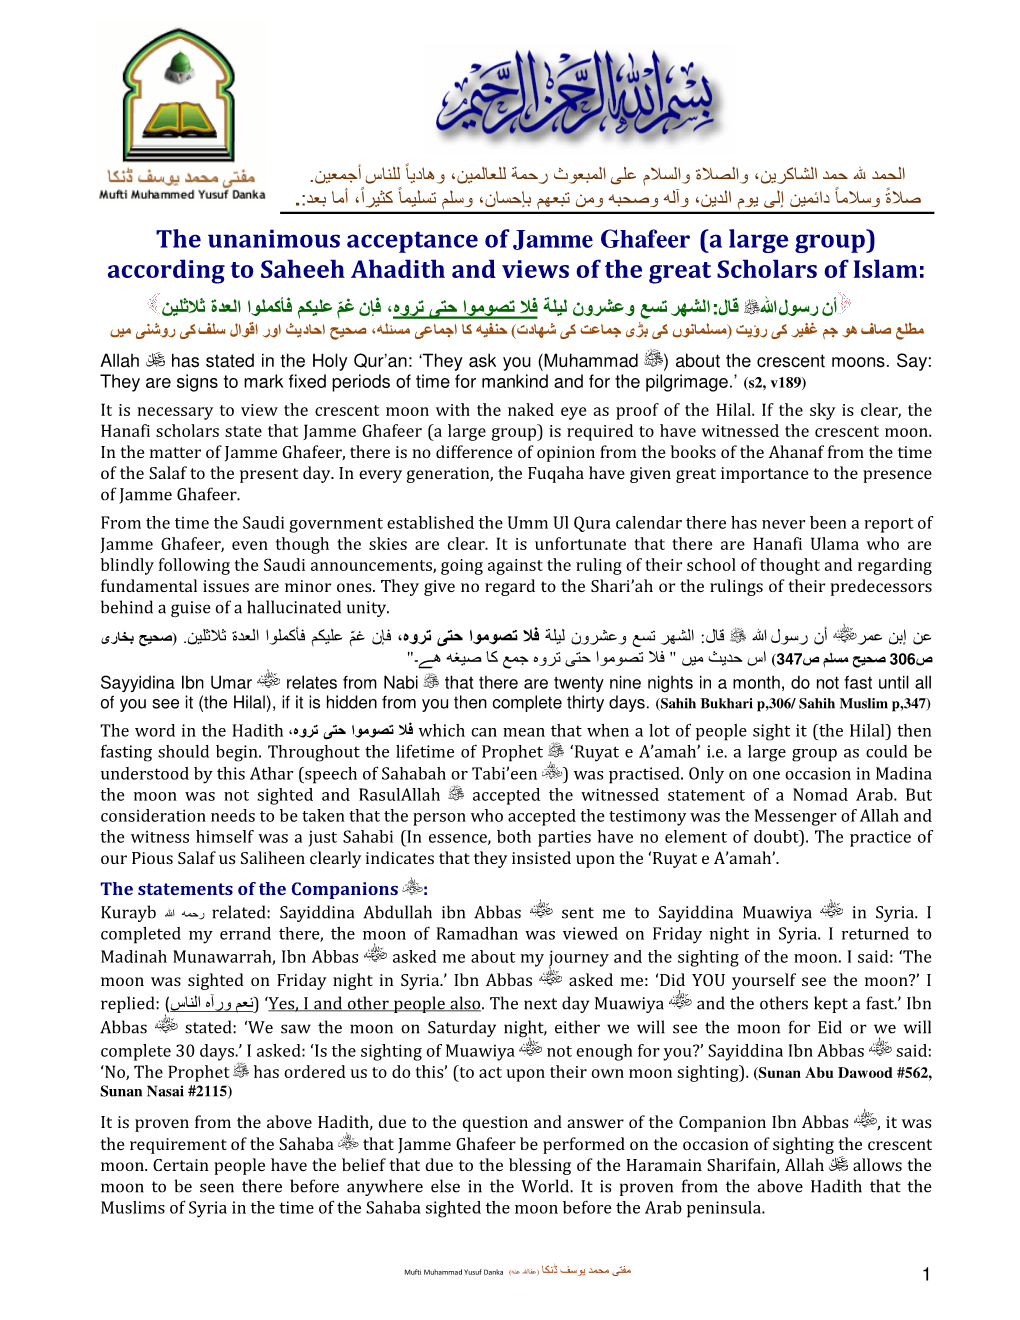 The Unanimous Acceptance of Jamme Ghafeer (A Large Group) According to Saheeh Ahadith and Views of the Great Scholars of Islam